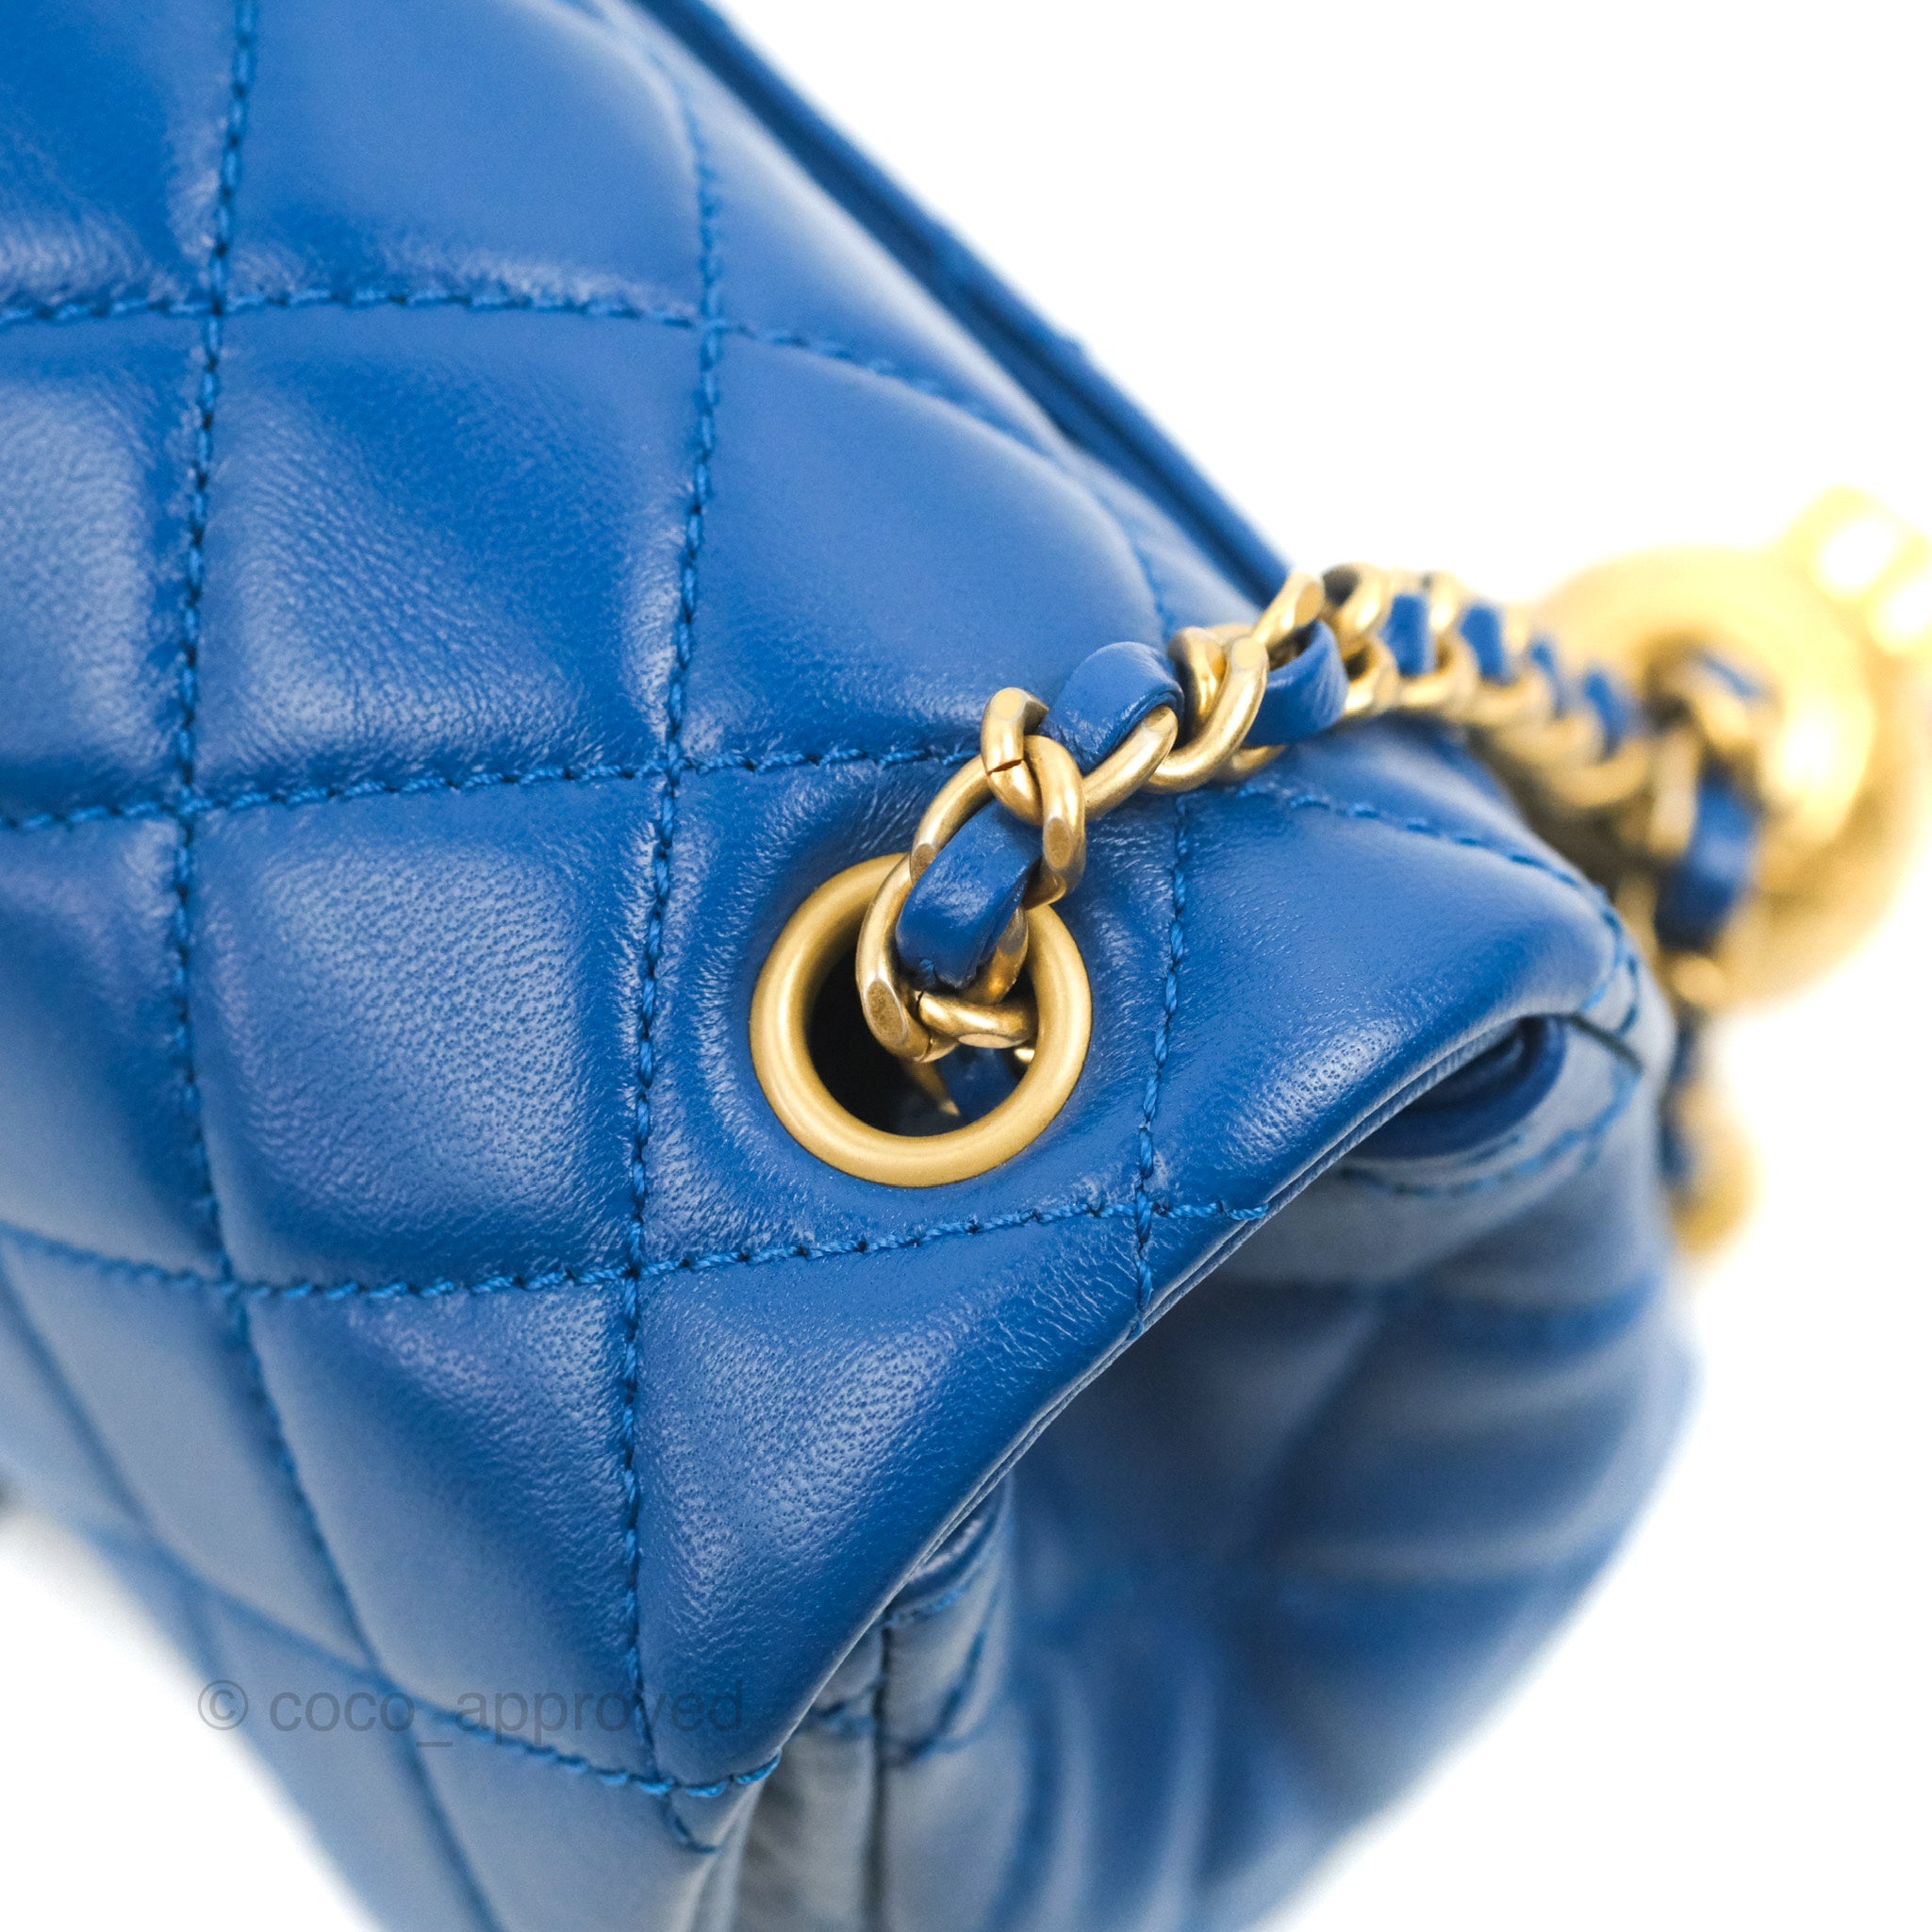 Chanel Quilted Mini Square Flap Light Teal Blue Lambskin Gold Hardware –  Coco Approved Studio